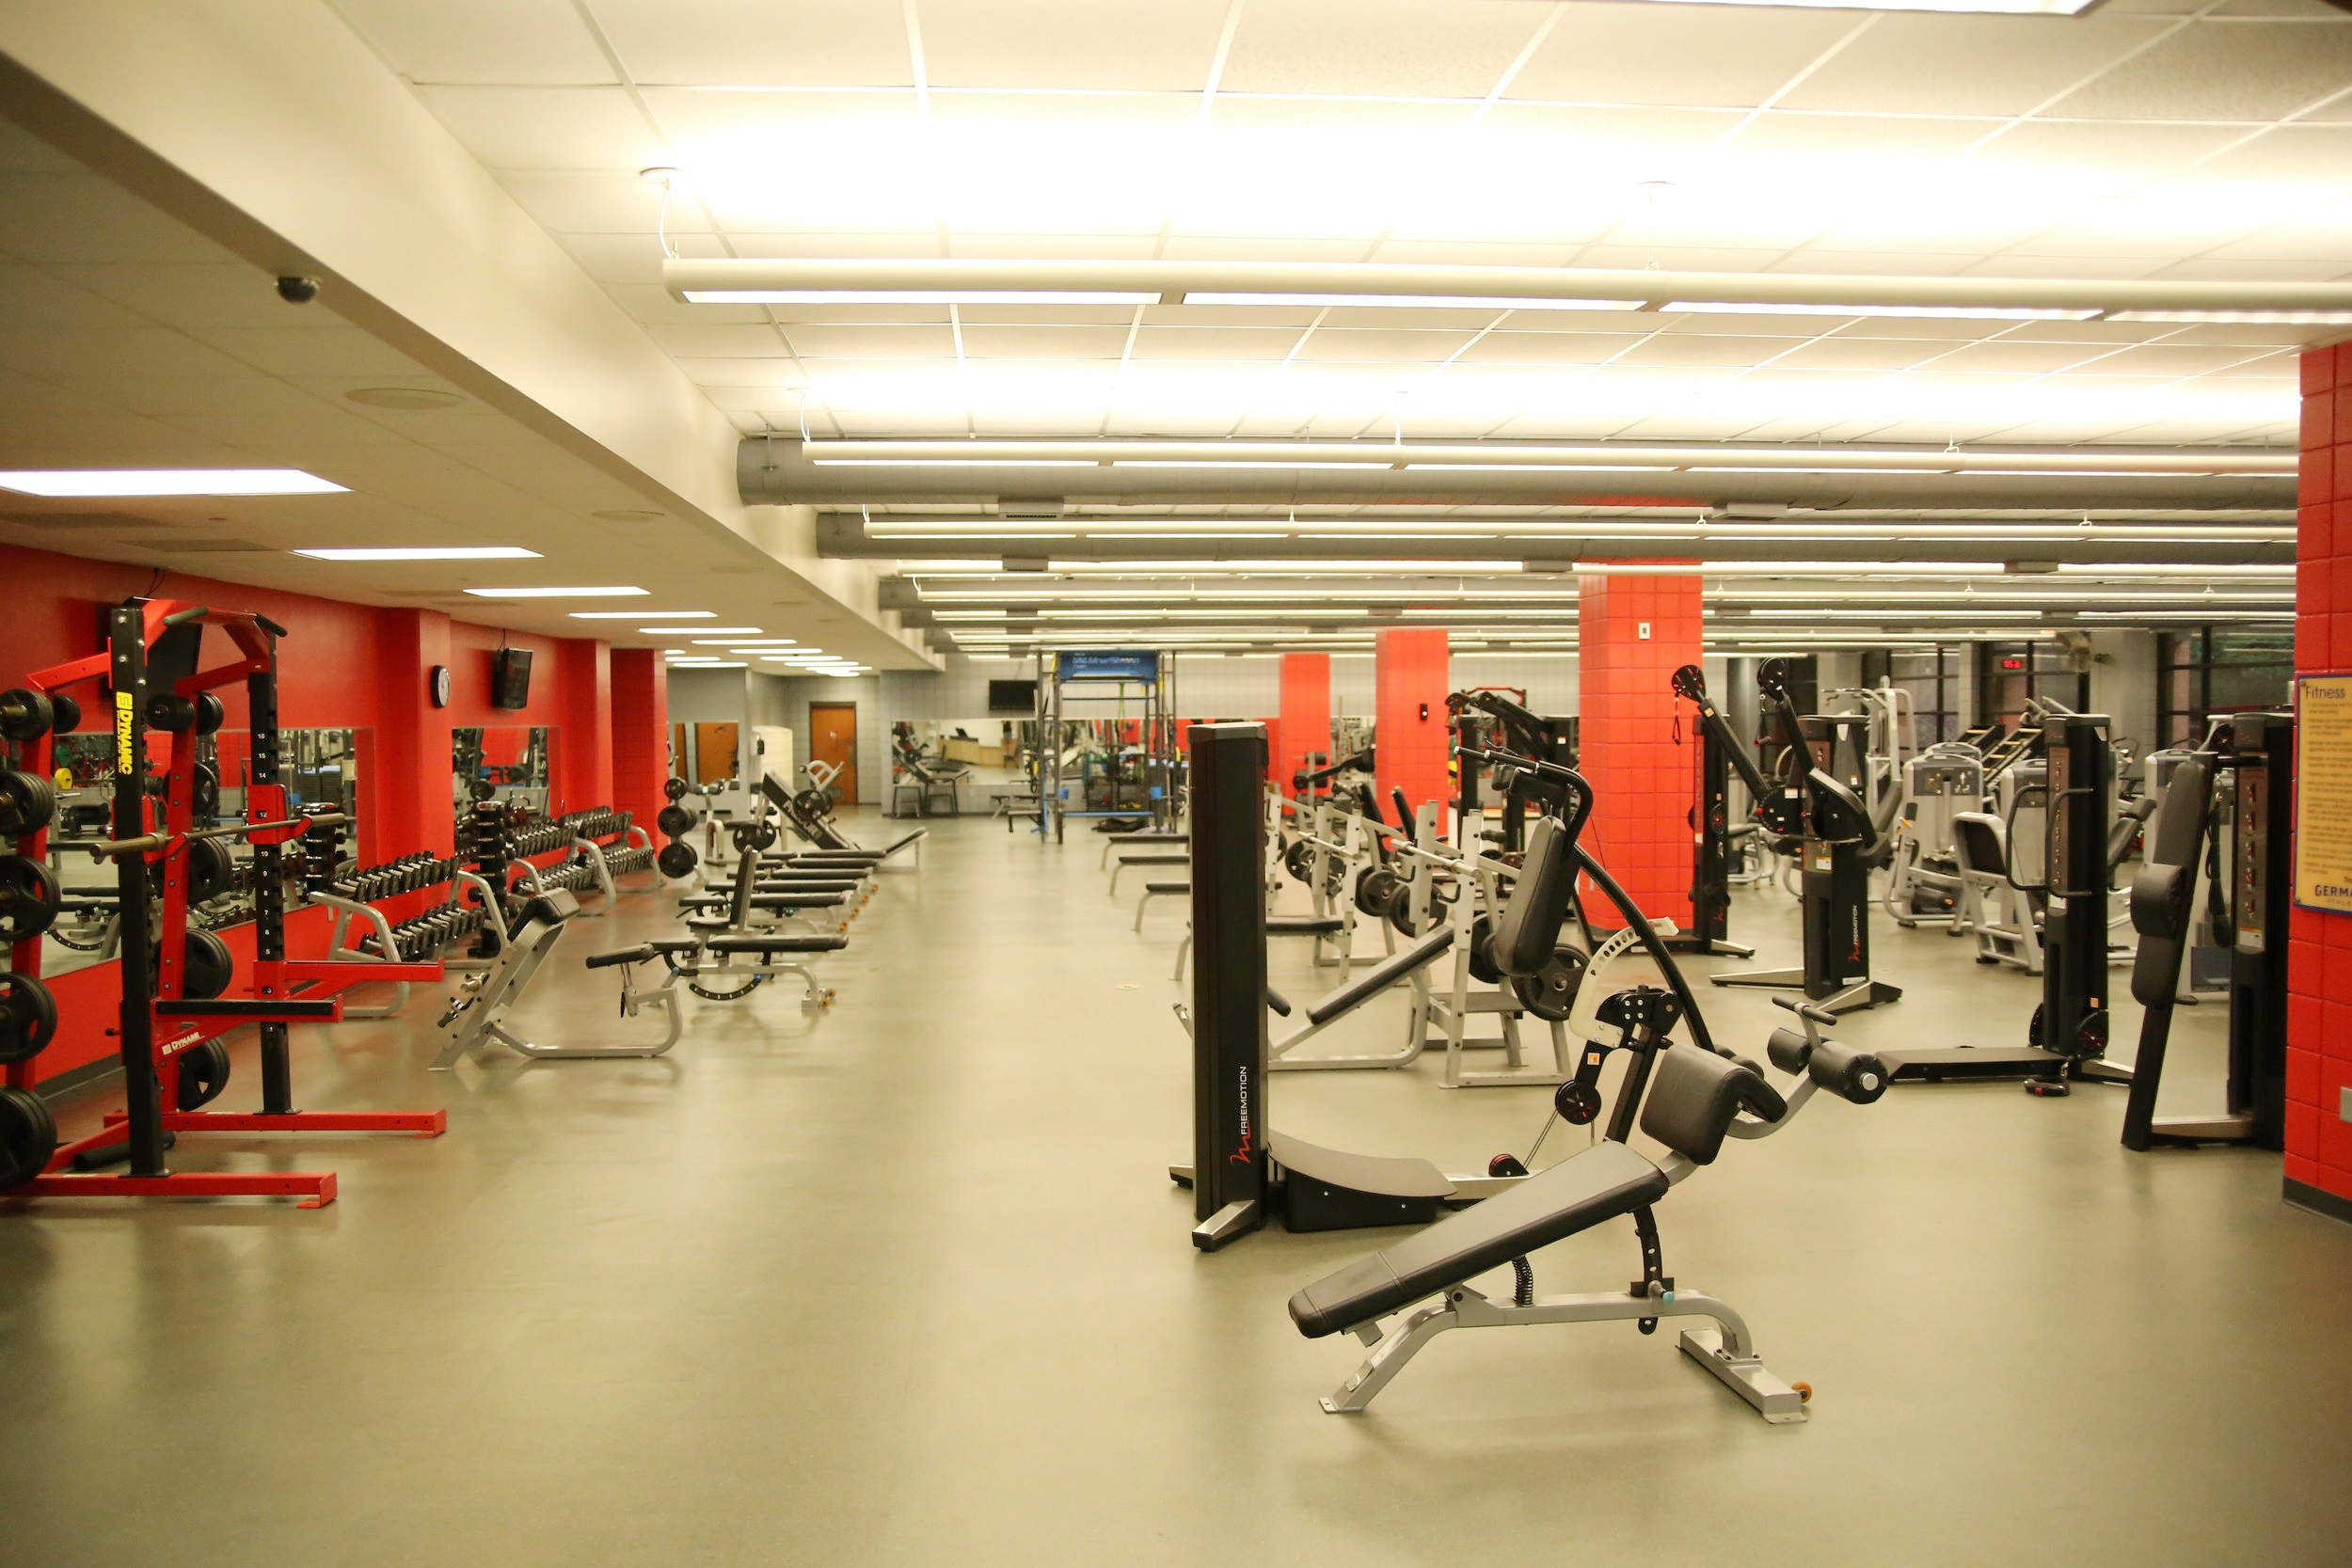   Germantown Athletic Club  Your Germantown Health and Fitness Destination  Become a Member  